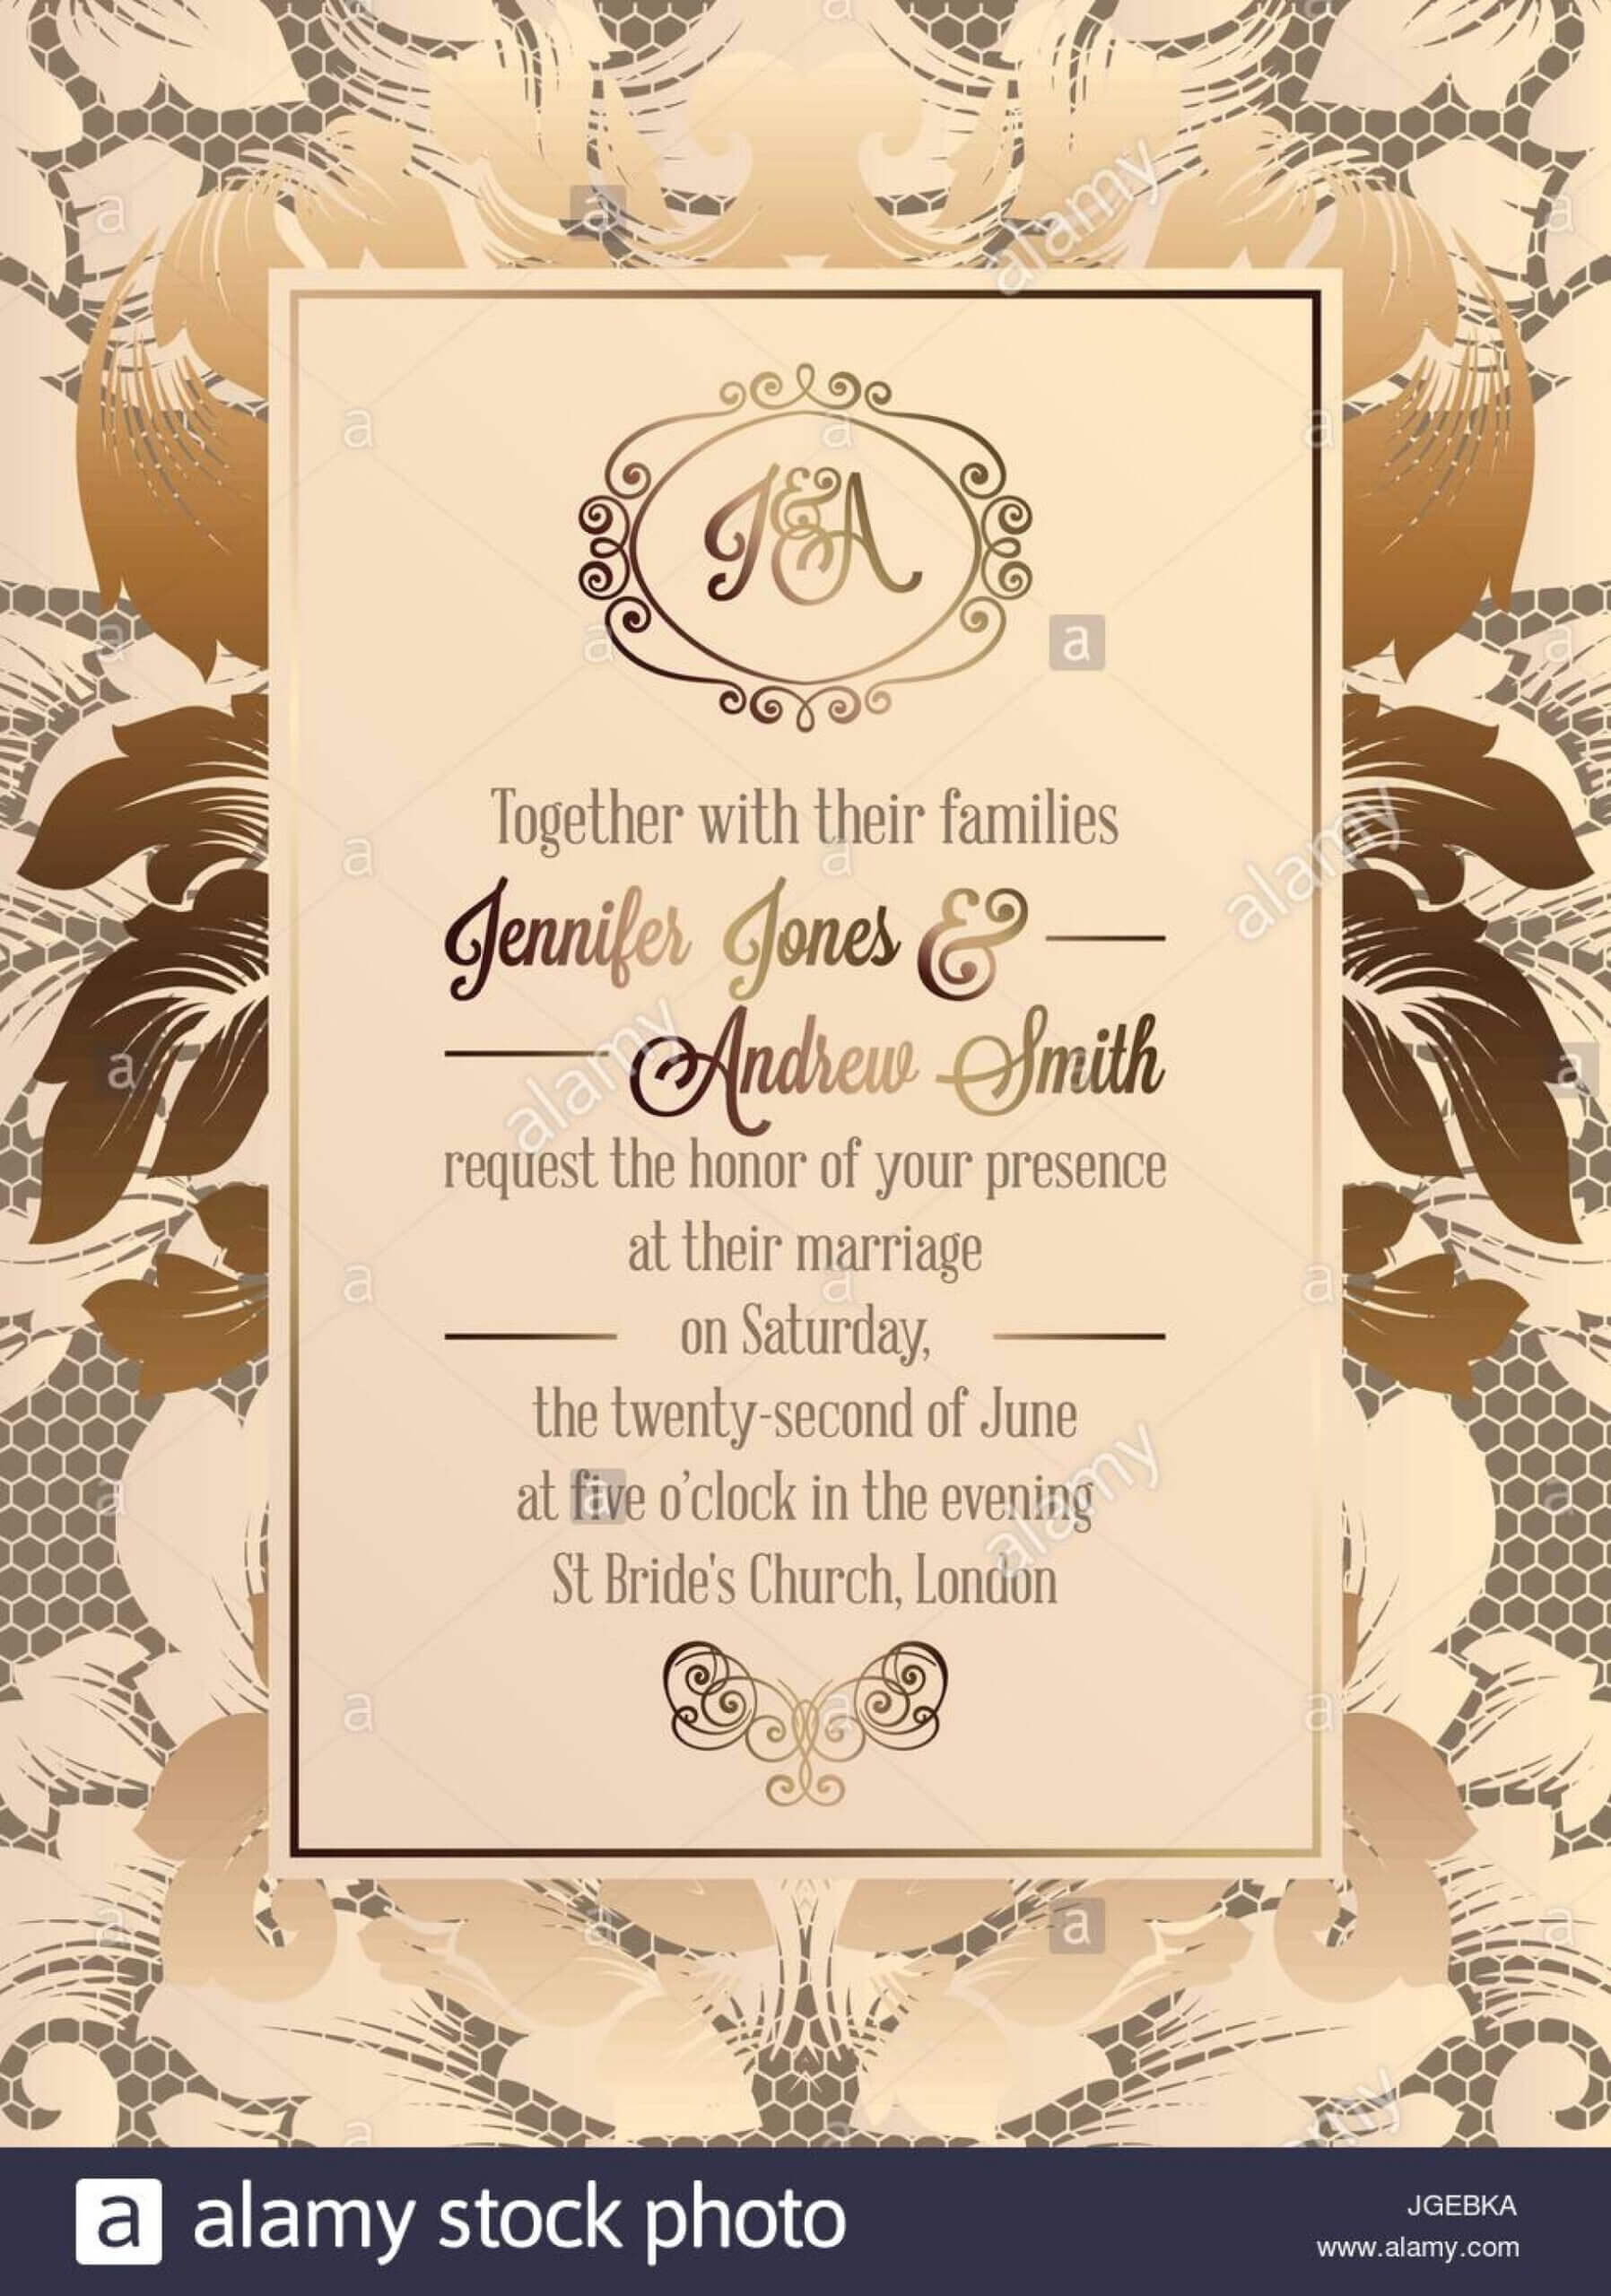 022 Template Ideas Gettyimages Church Invitation Cards With Church Invite Cards Template